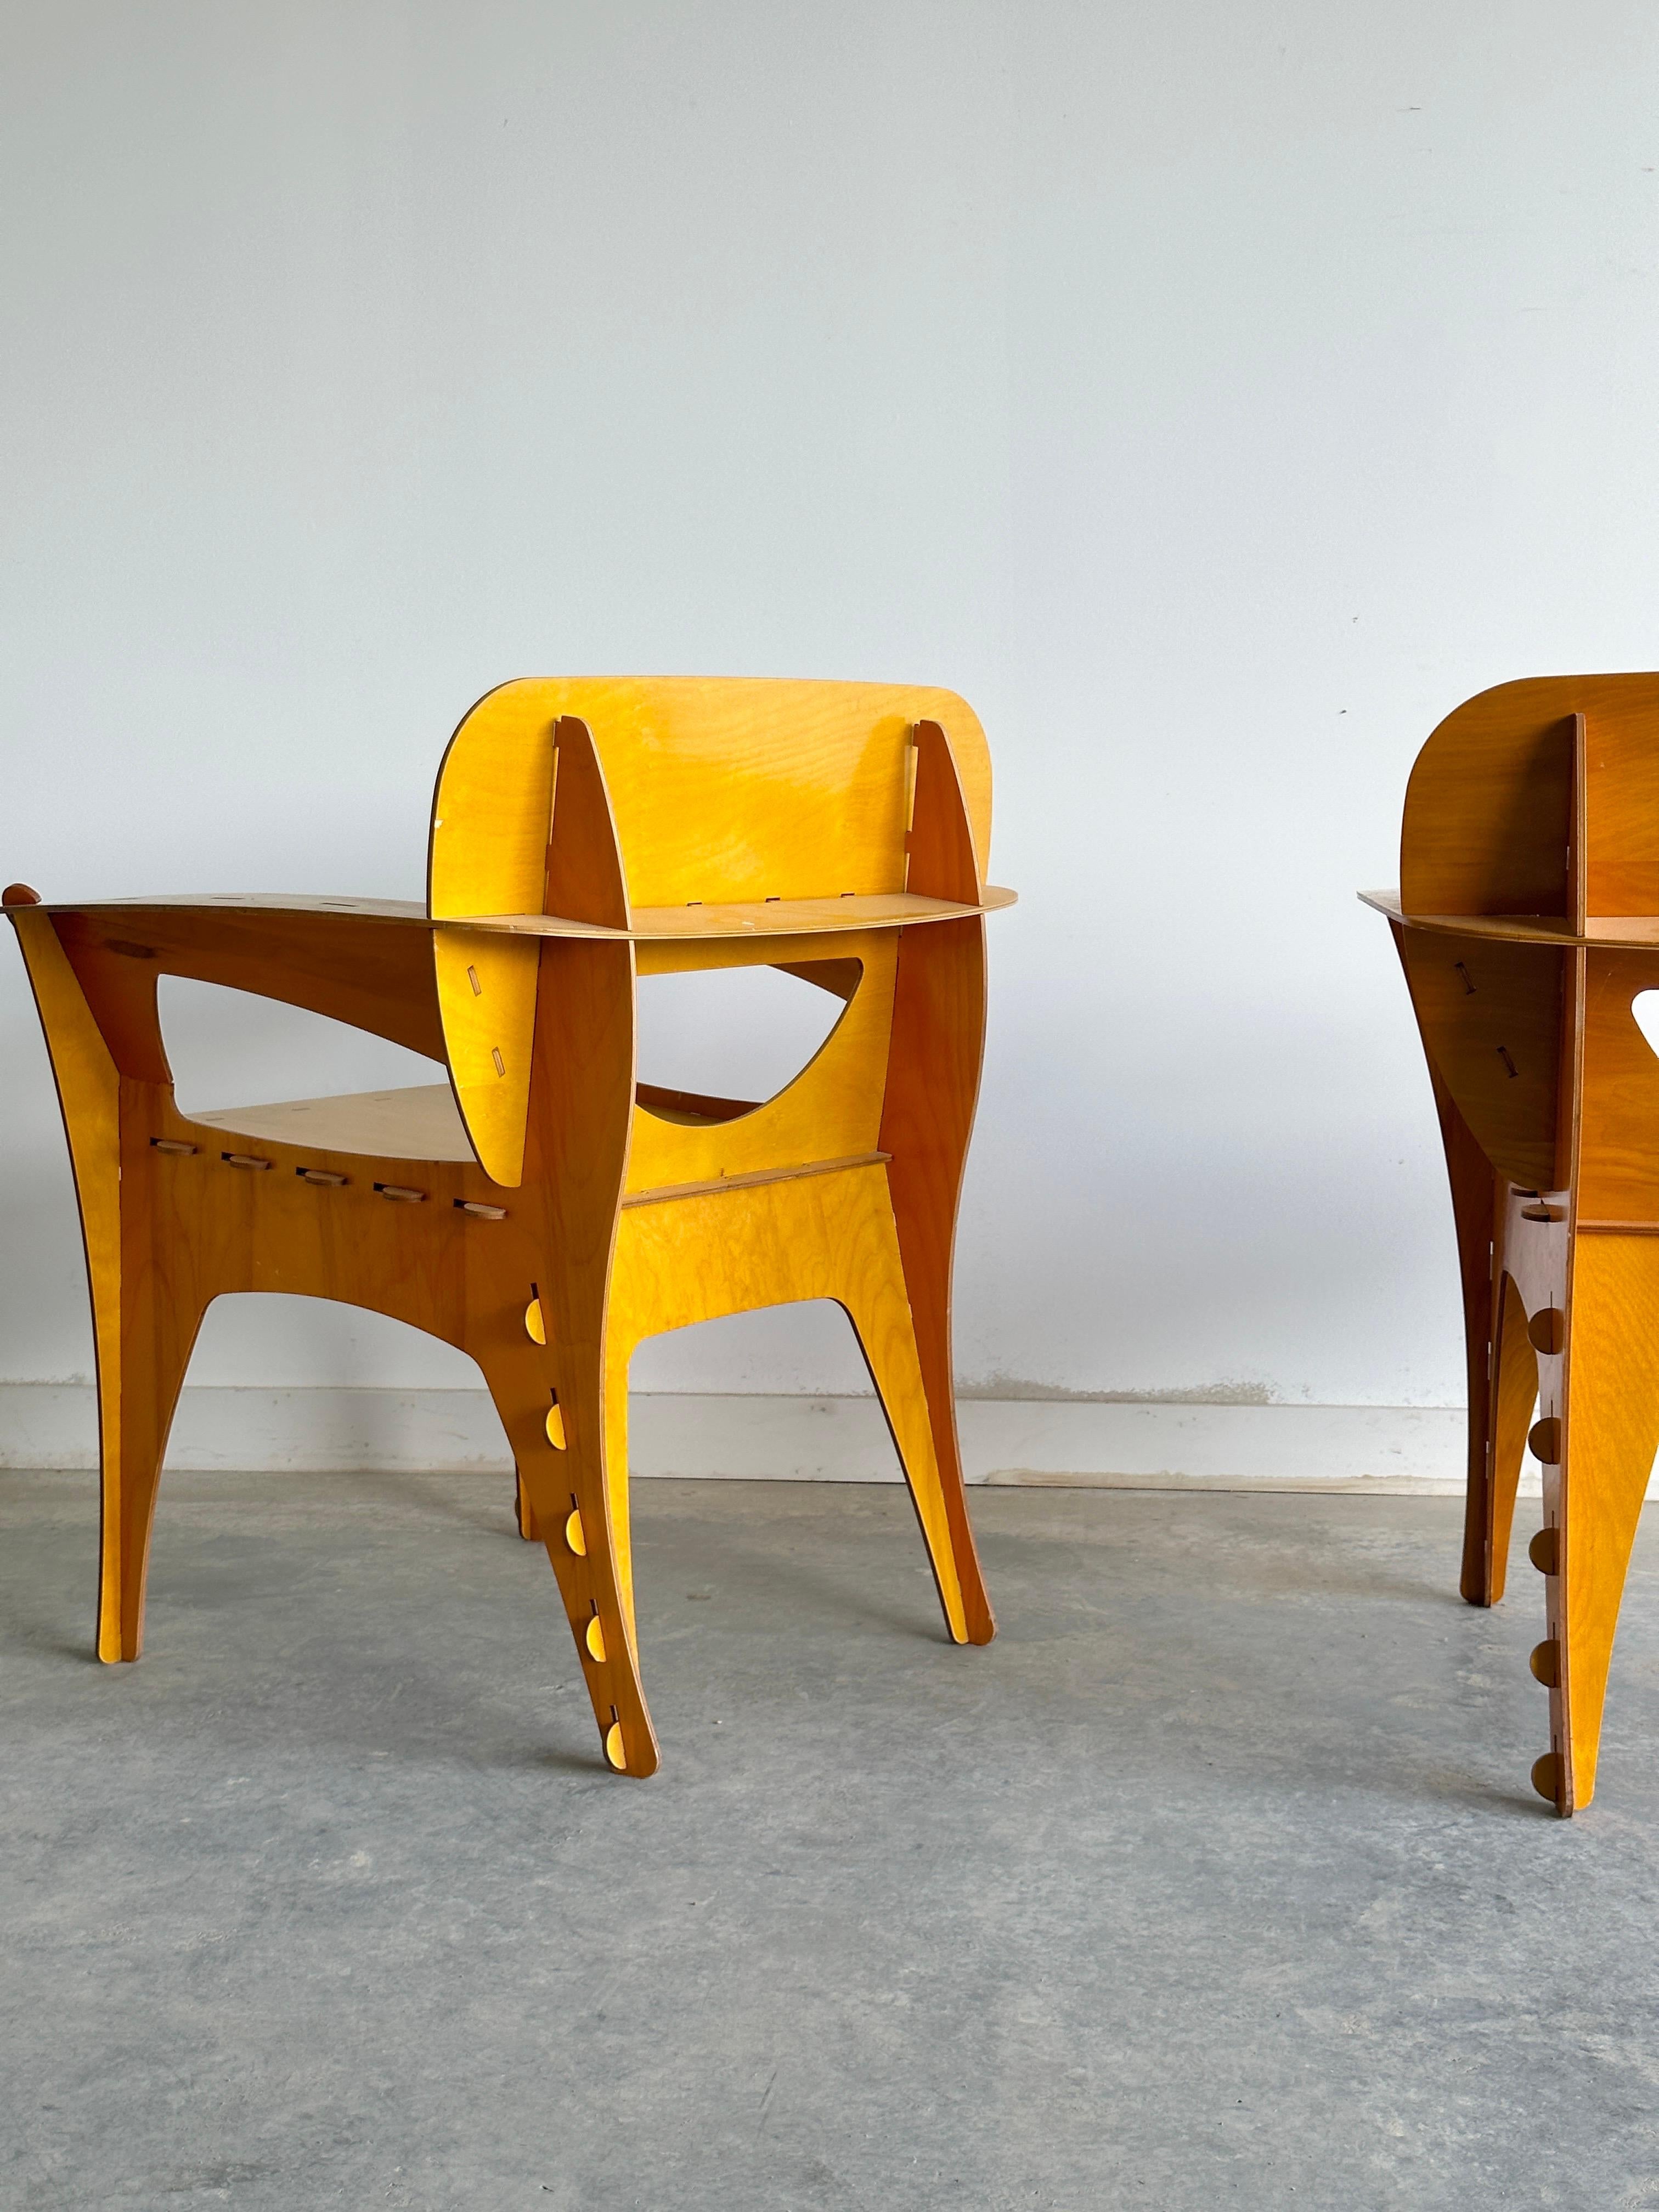 Plywood Sculptural plywood Puzzle Chair by David Kawecki For Sale